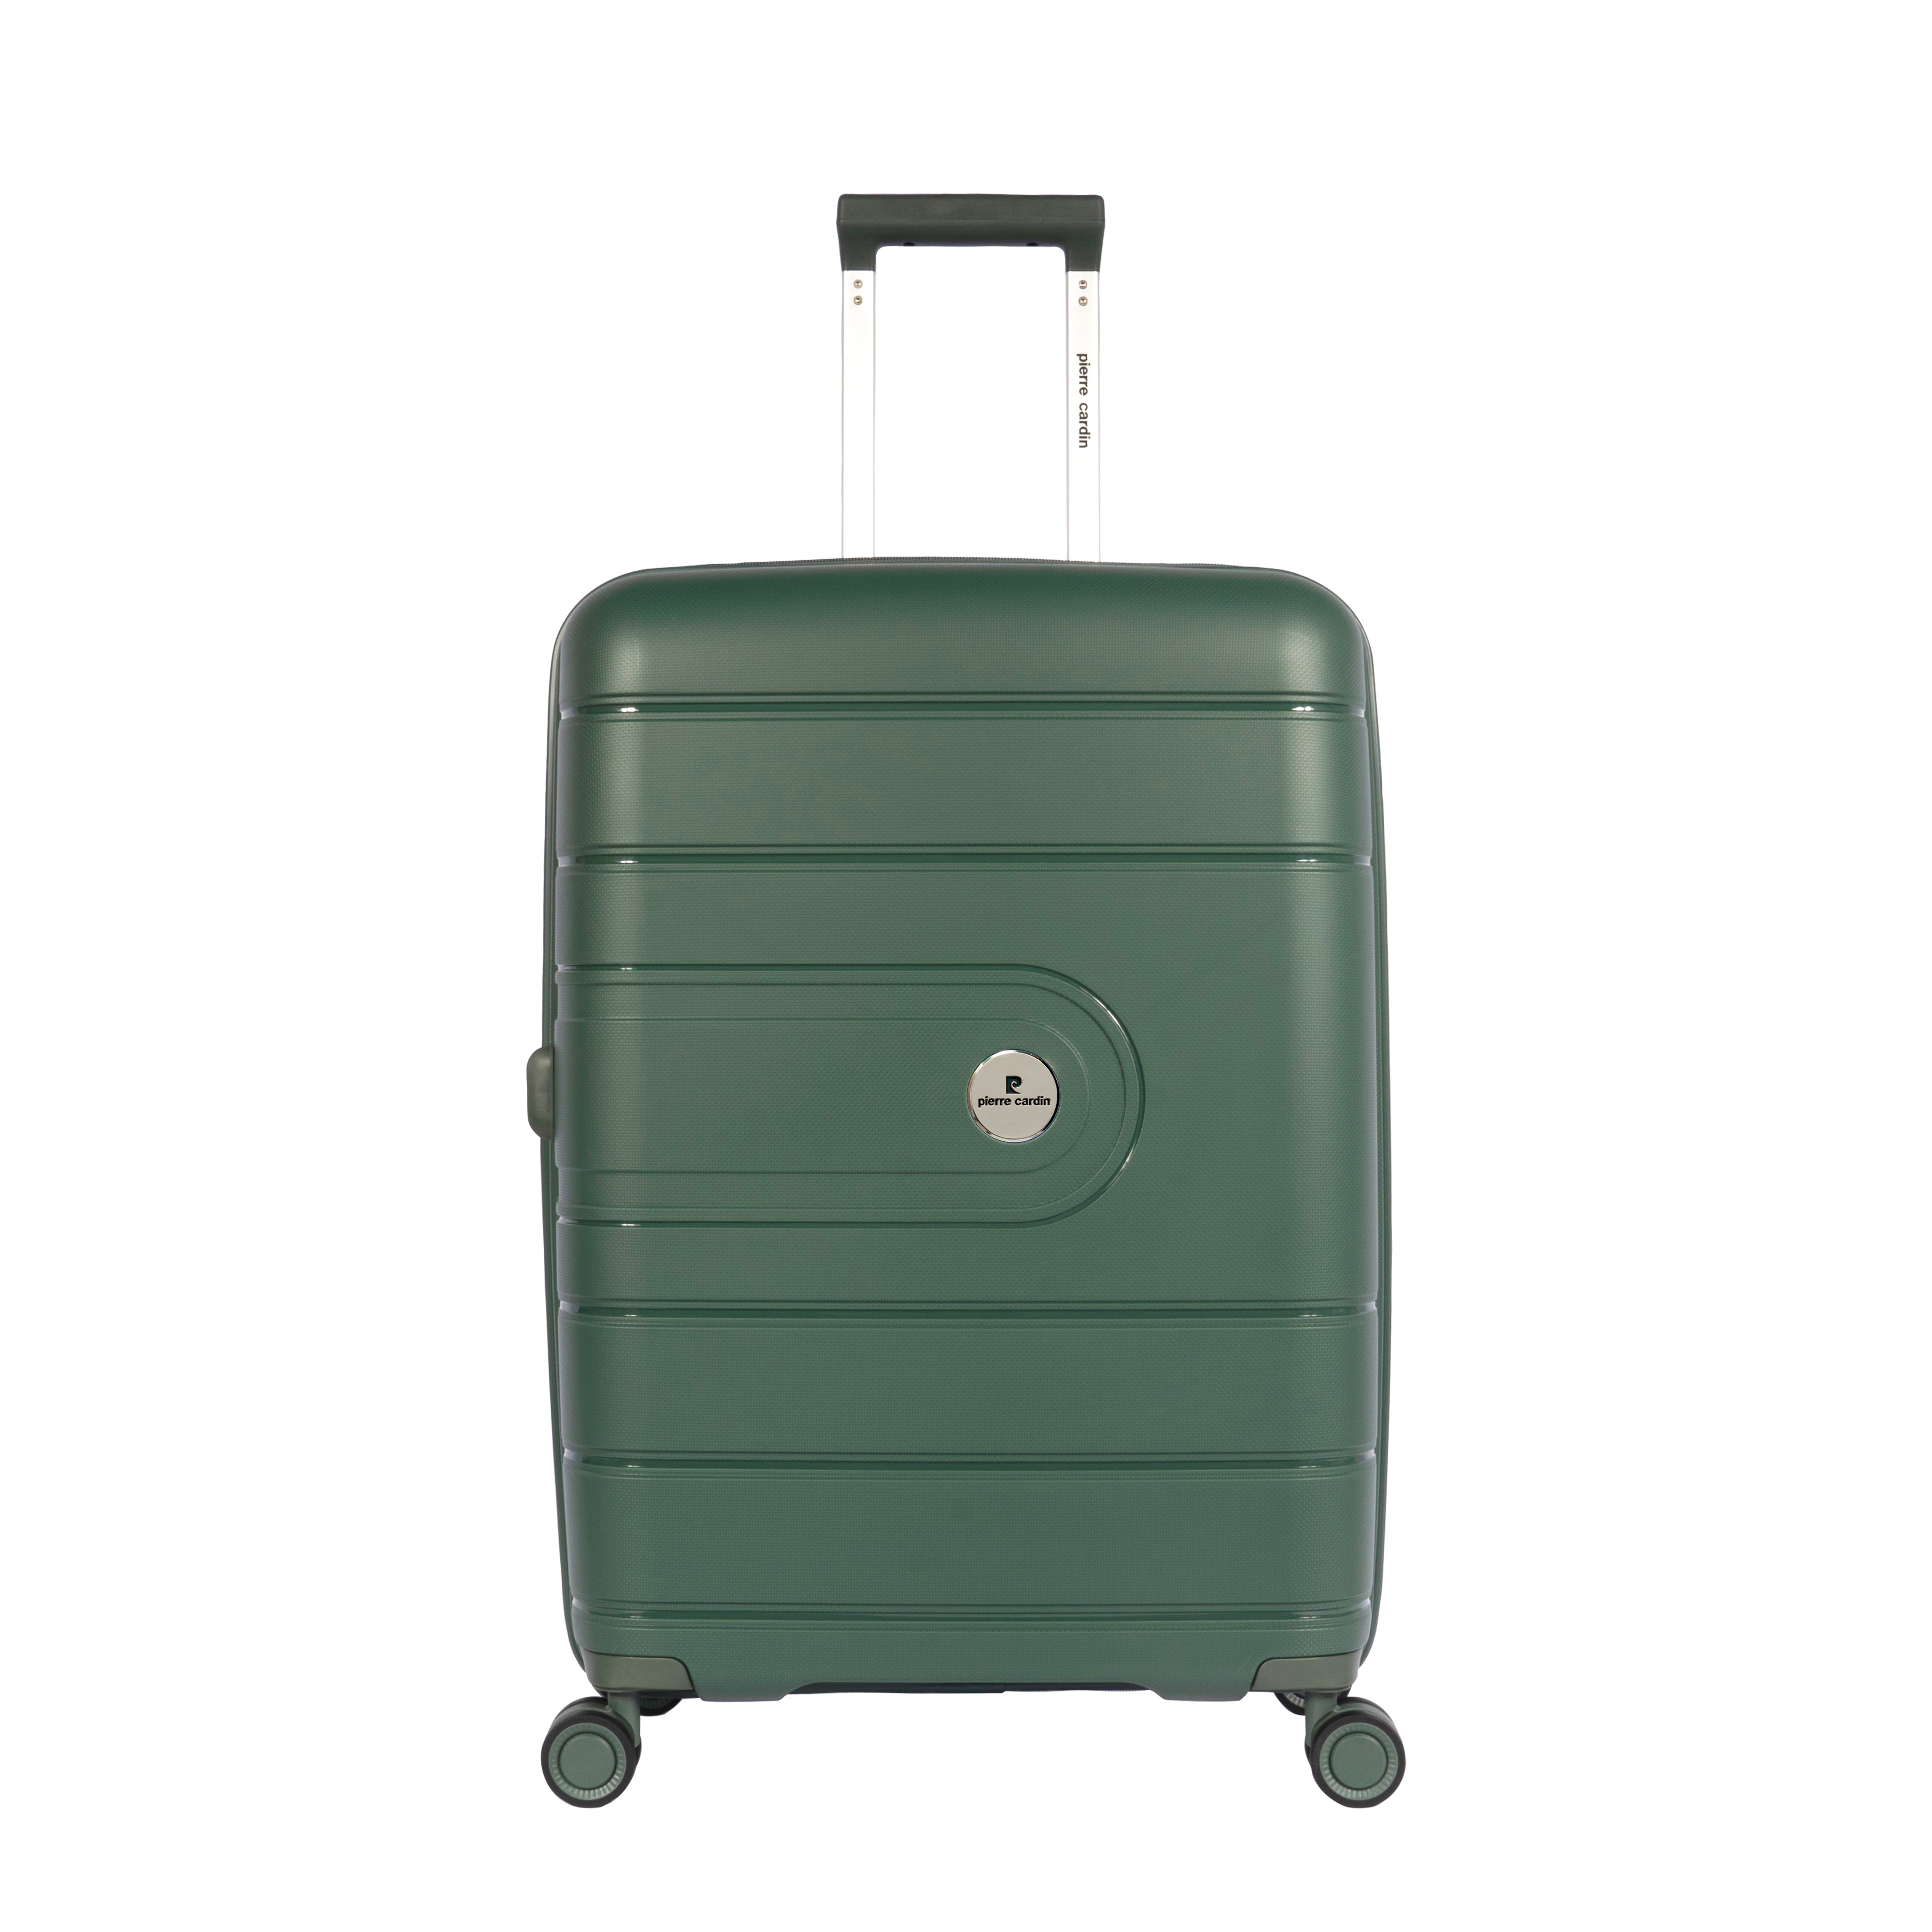 Pierre Cardin New Collection Hardcase Trolley Set Of 4T - Green